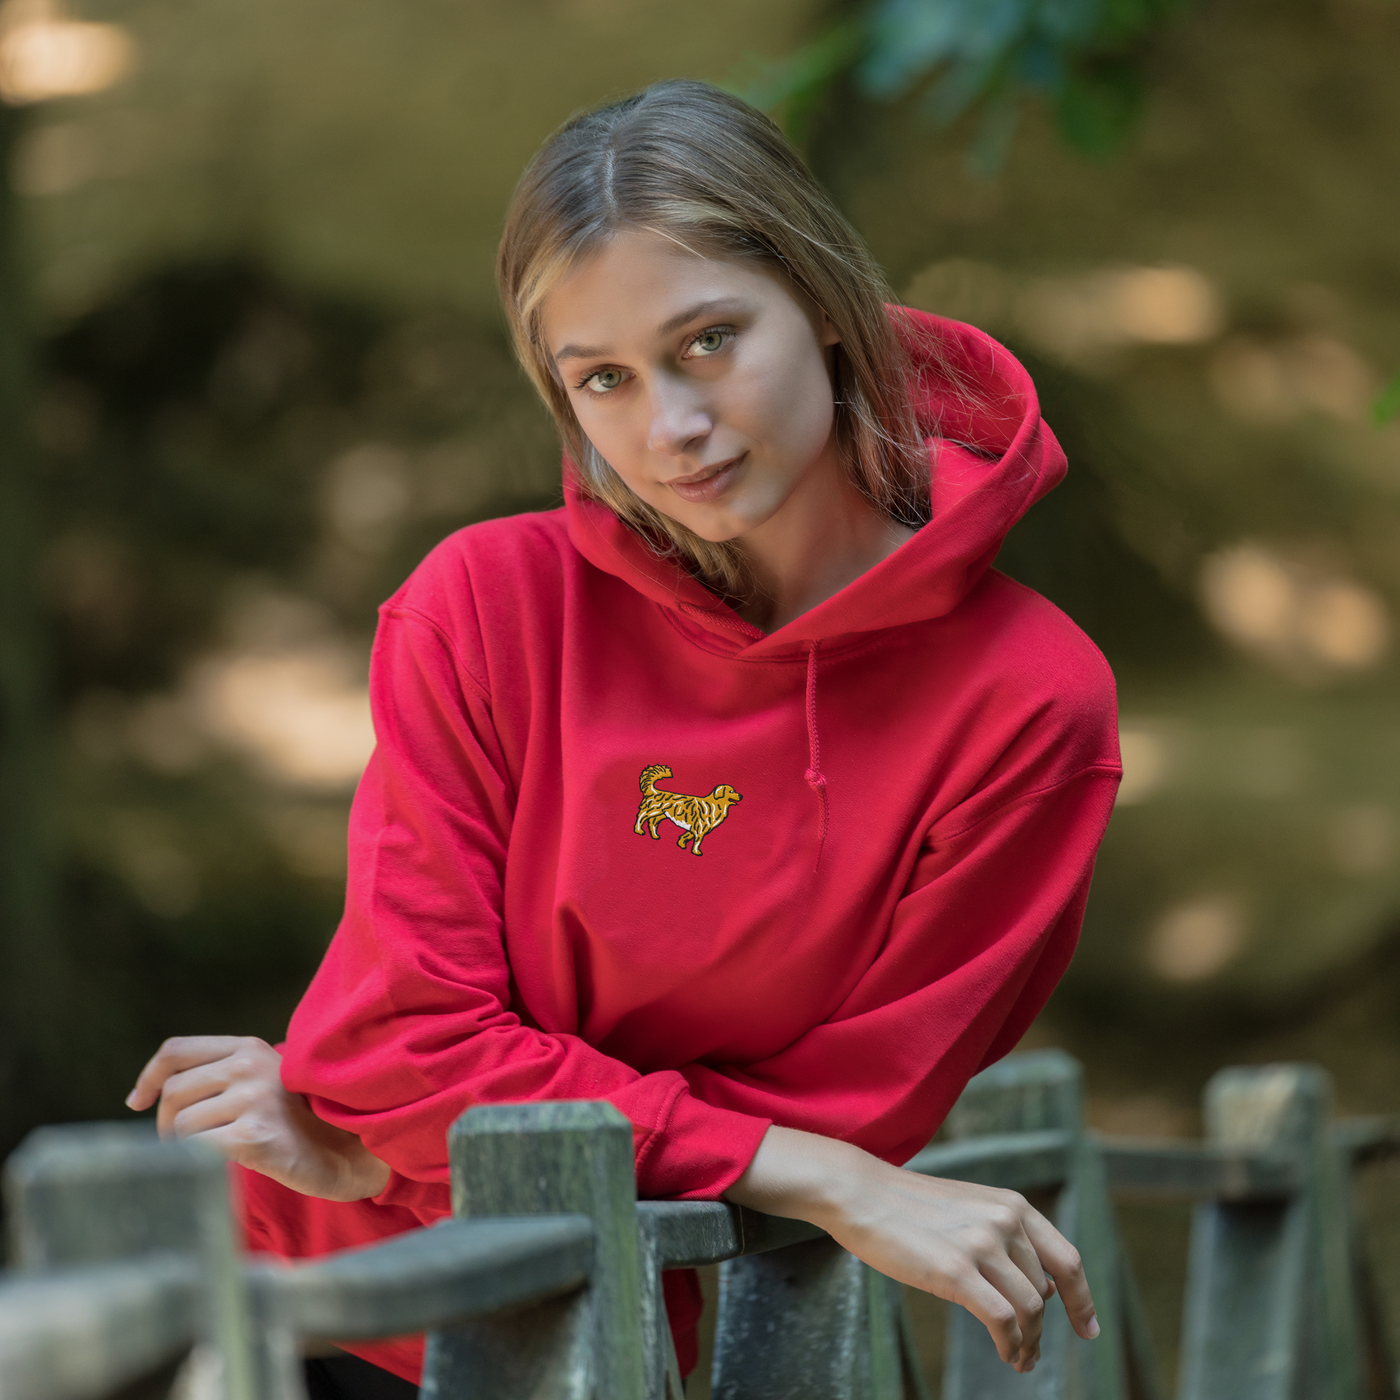 Bobby's Planet Women's Embroidered Golden Retriever Hoodie from Paws Dog Cat Animals Collection in Red Color#color_red